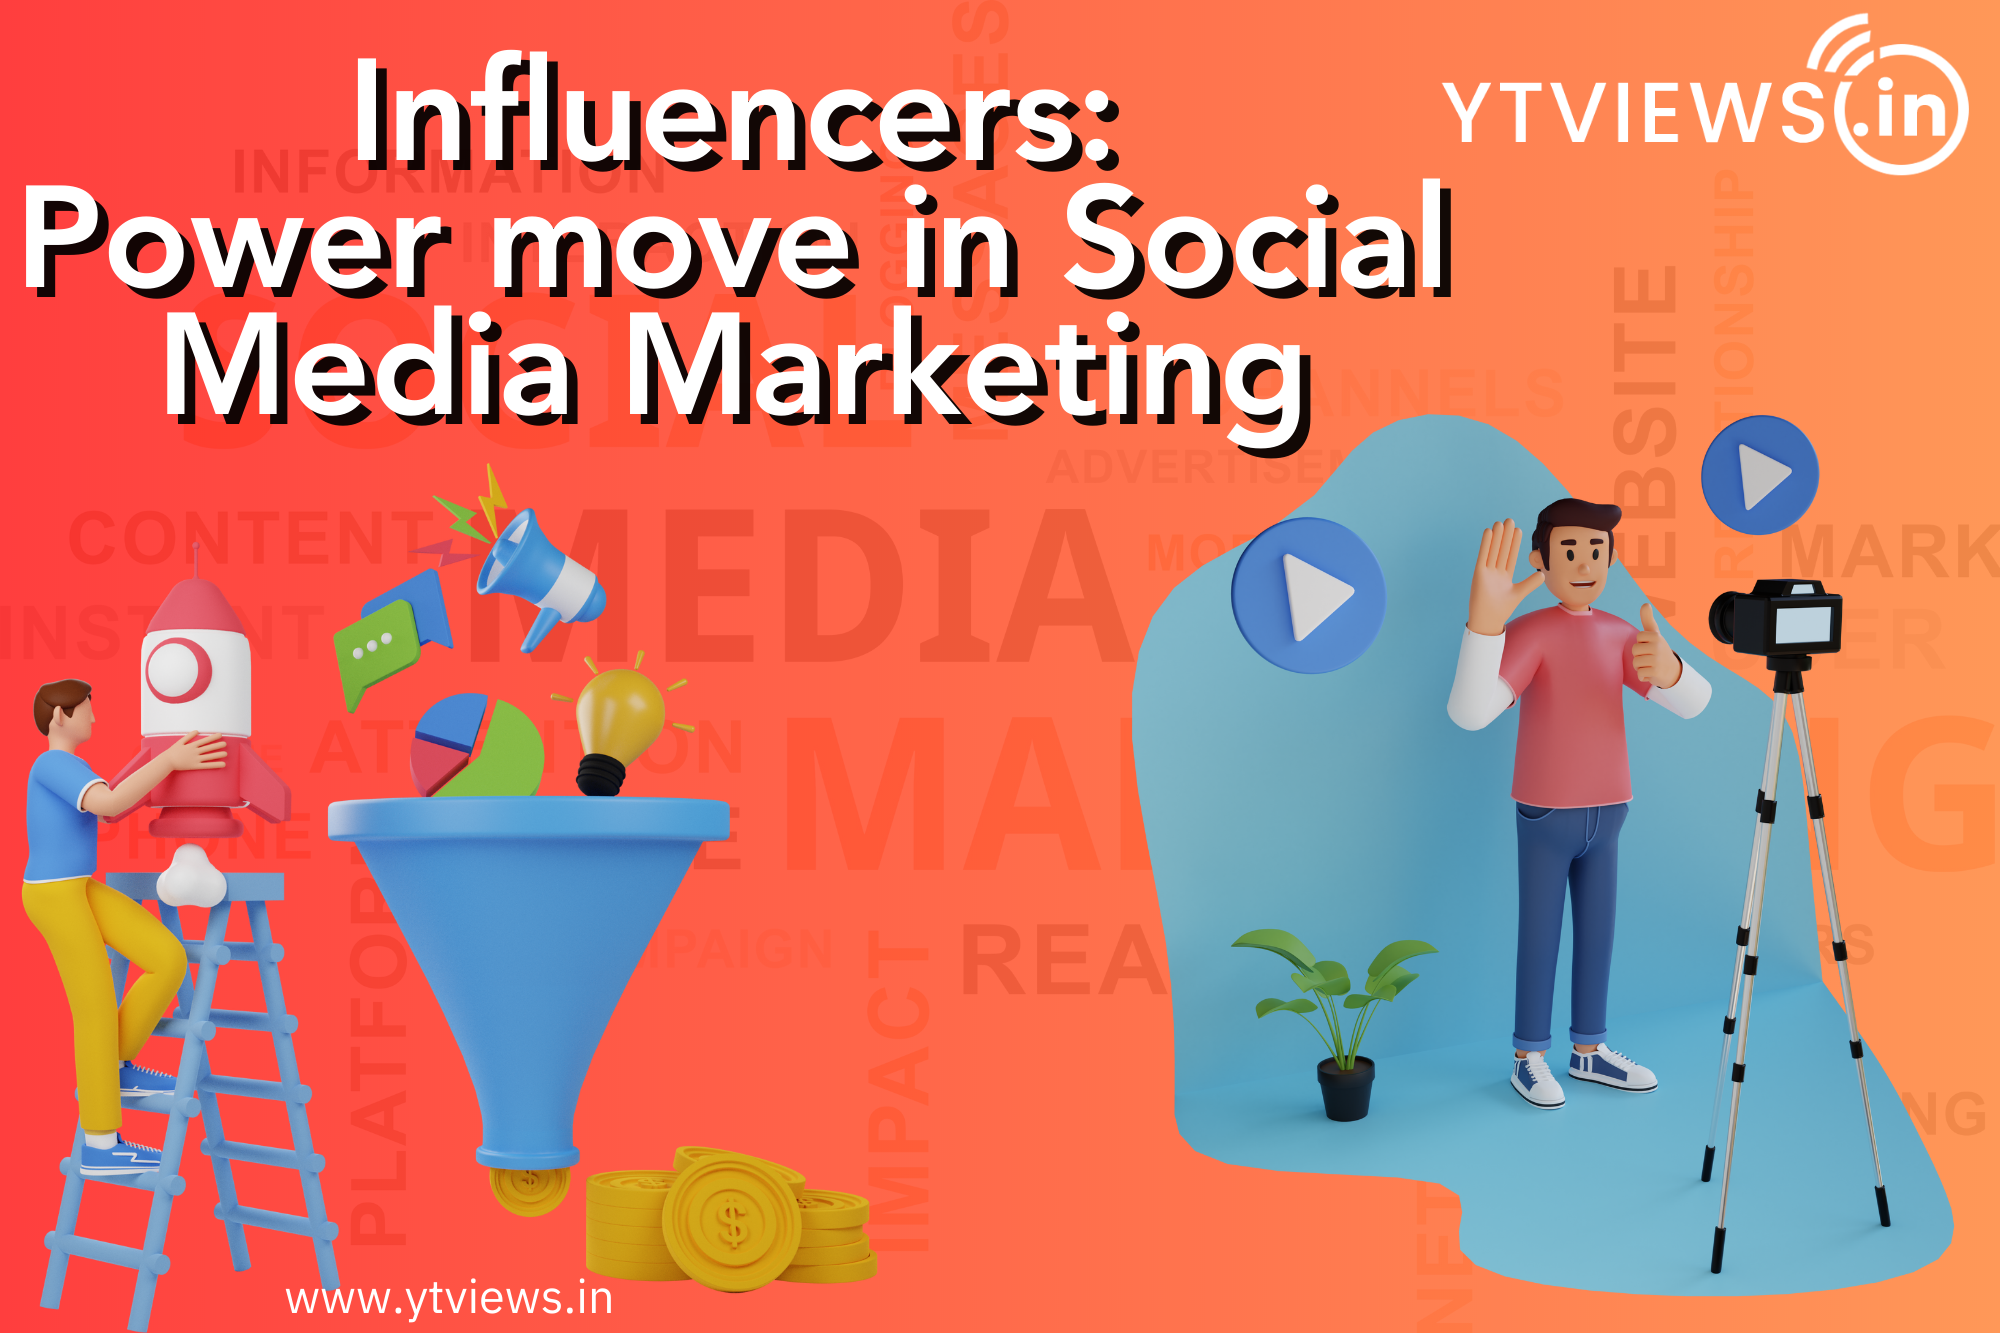 How reaching out to Influencers during Content Creation and Promotion is an effective Social Media Marketing Strategy?